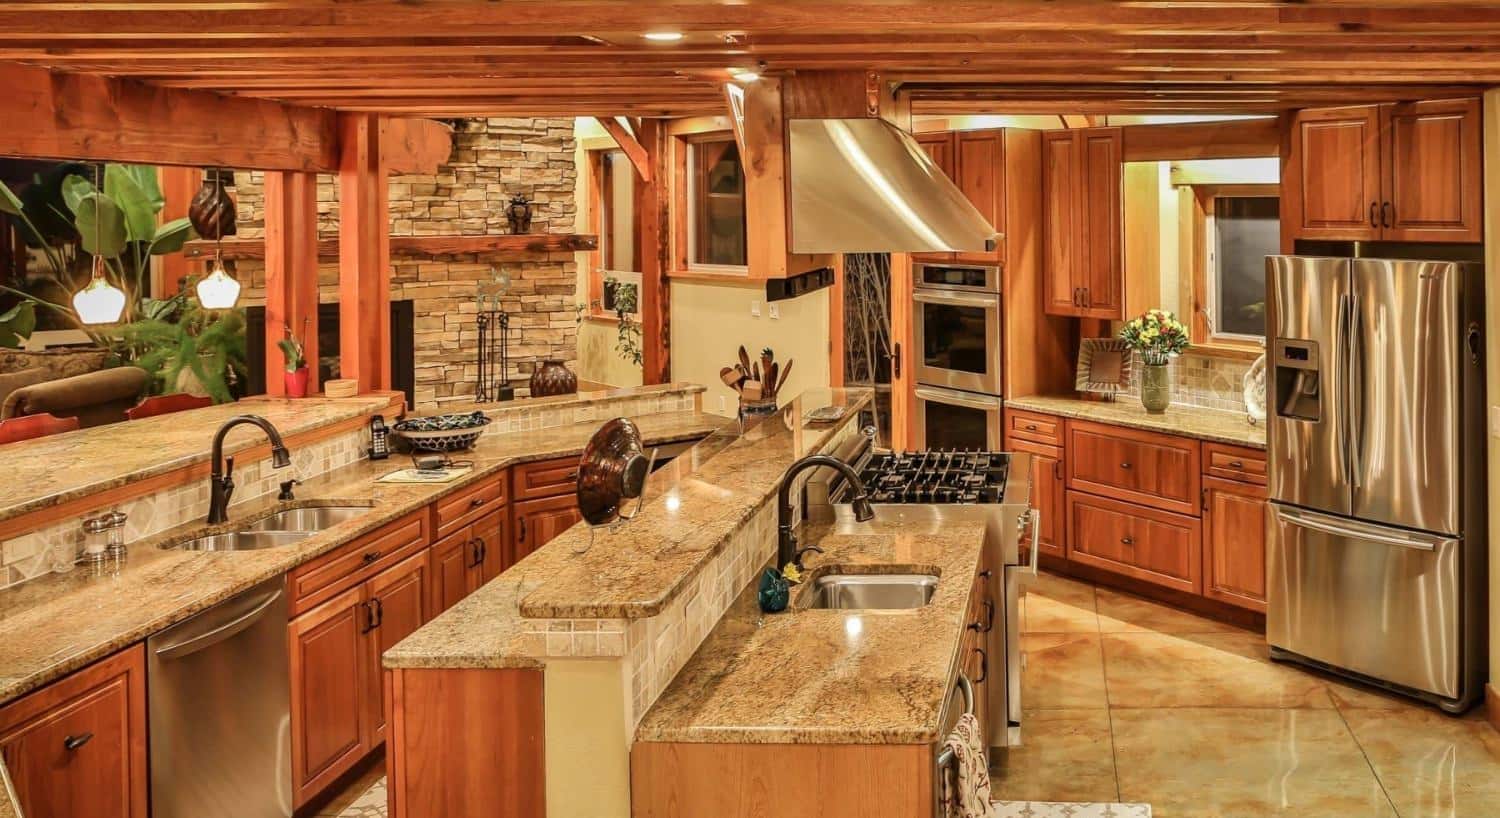 Large kitchen with stamped concrete flooring, wooden cabinets, stone countertops, and stainless steel appliances